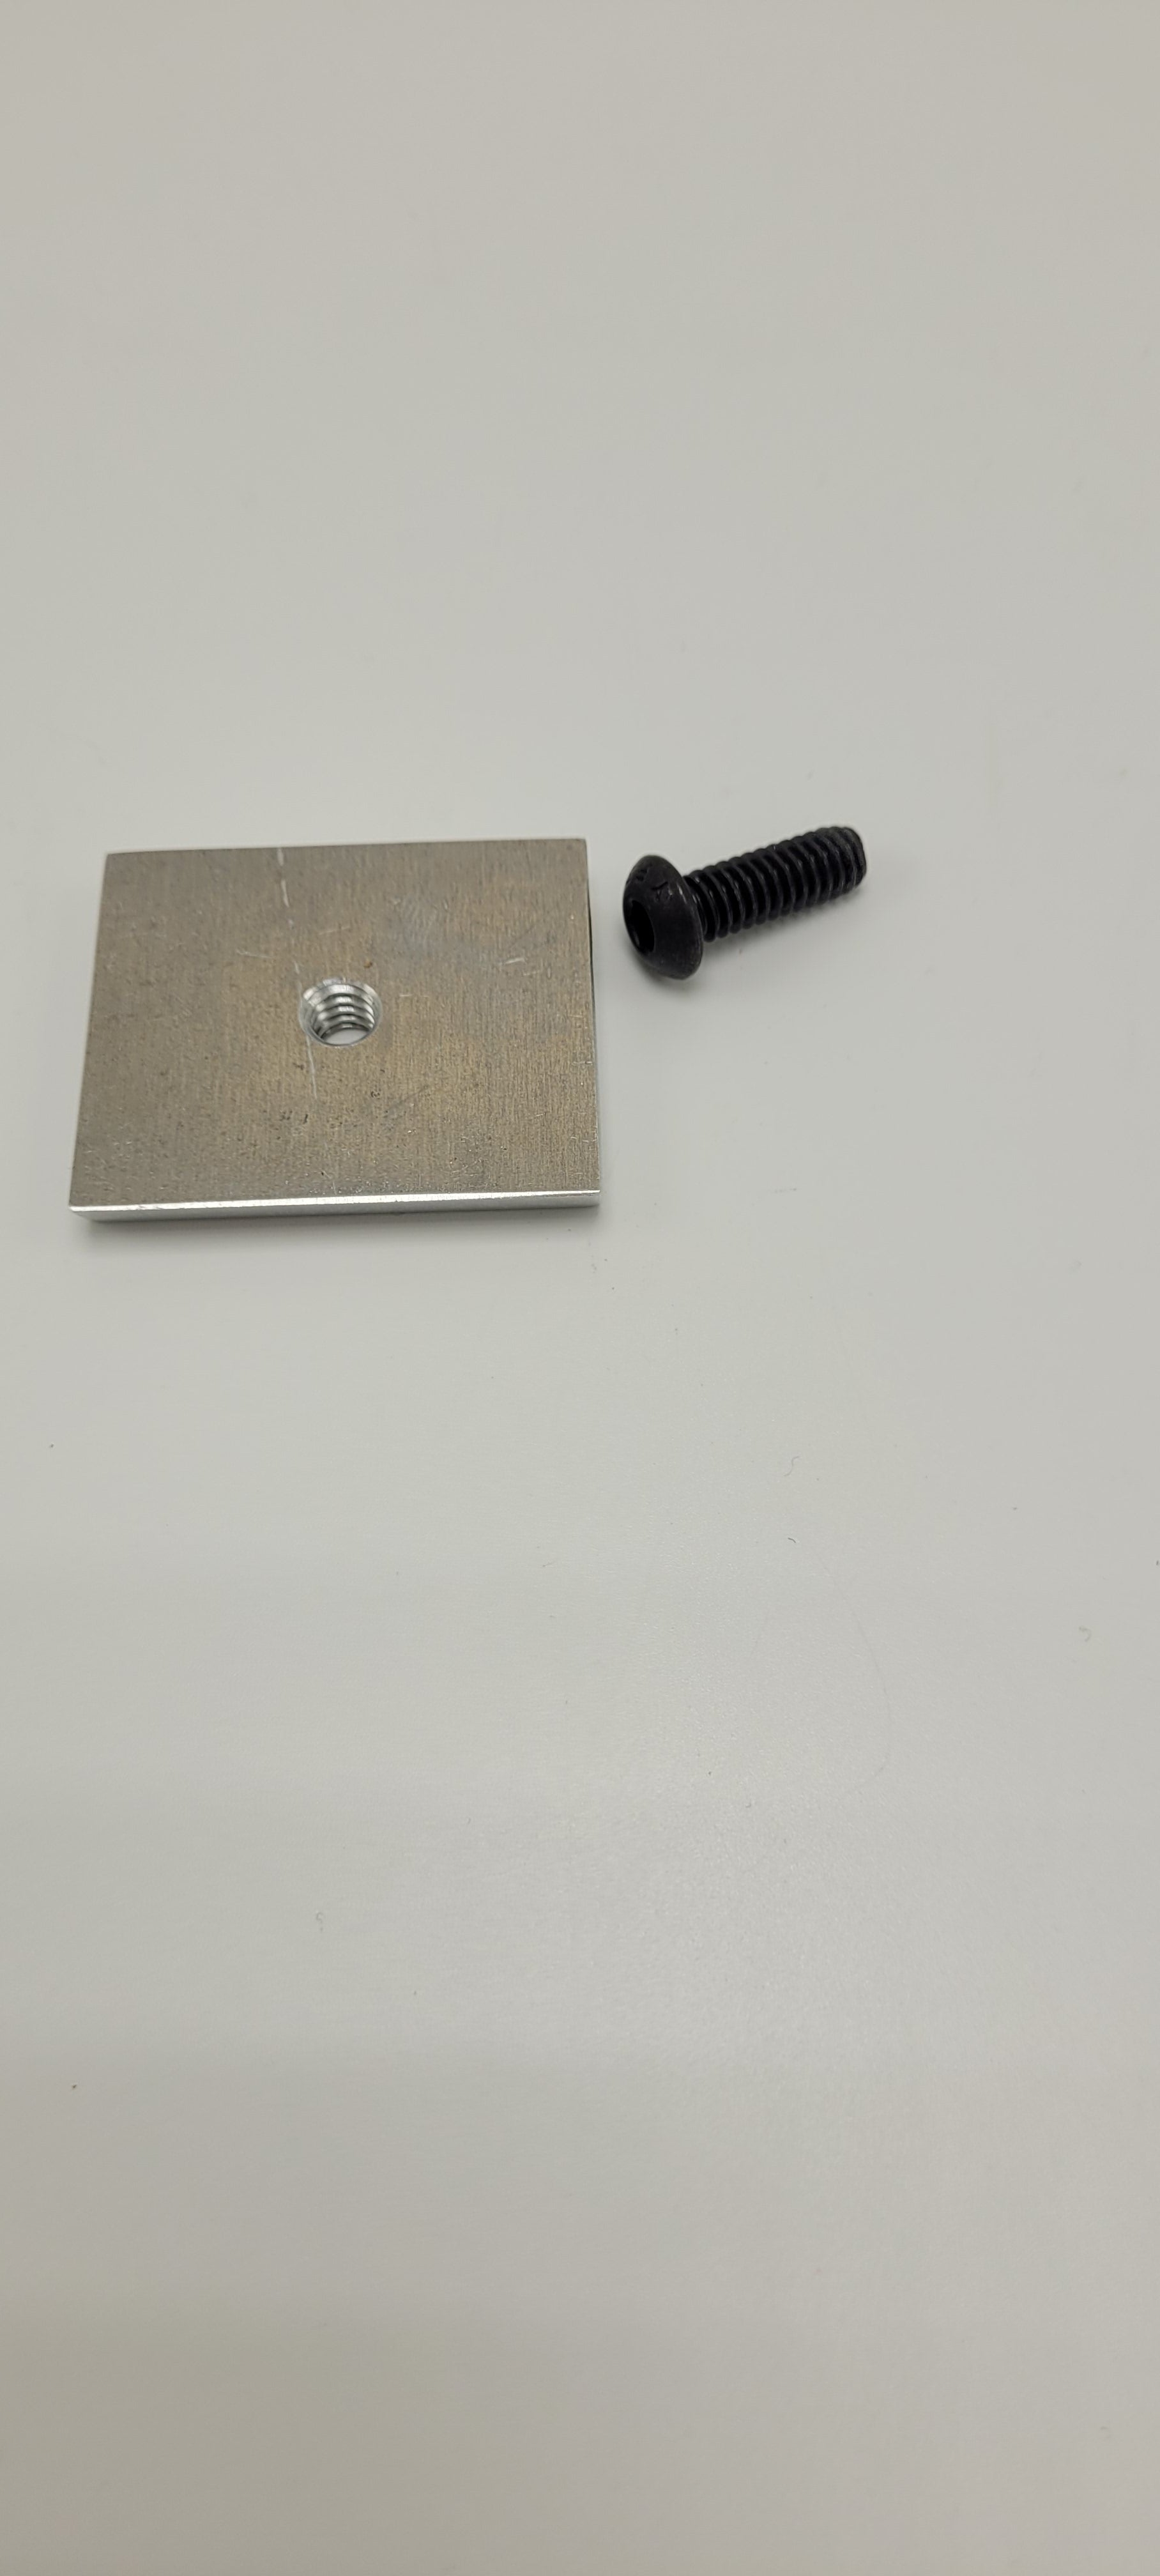 Blue Skies Drones - Metal Adapter mounting plate for Sensors - Threaded